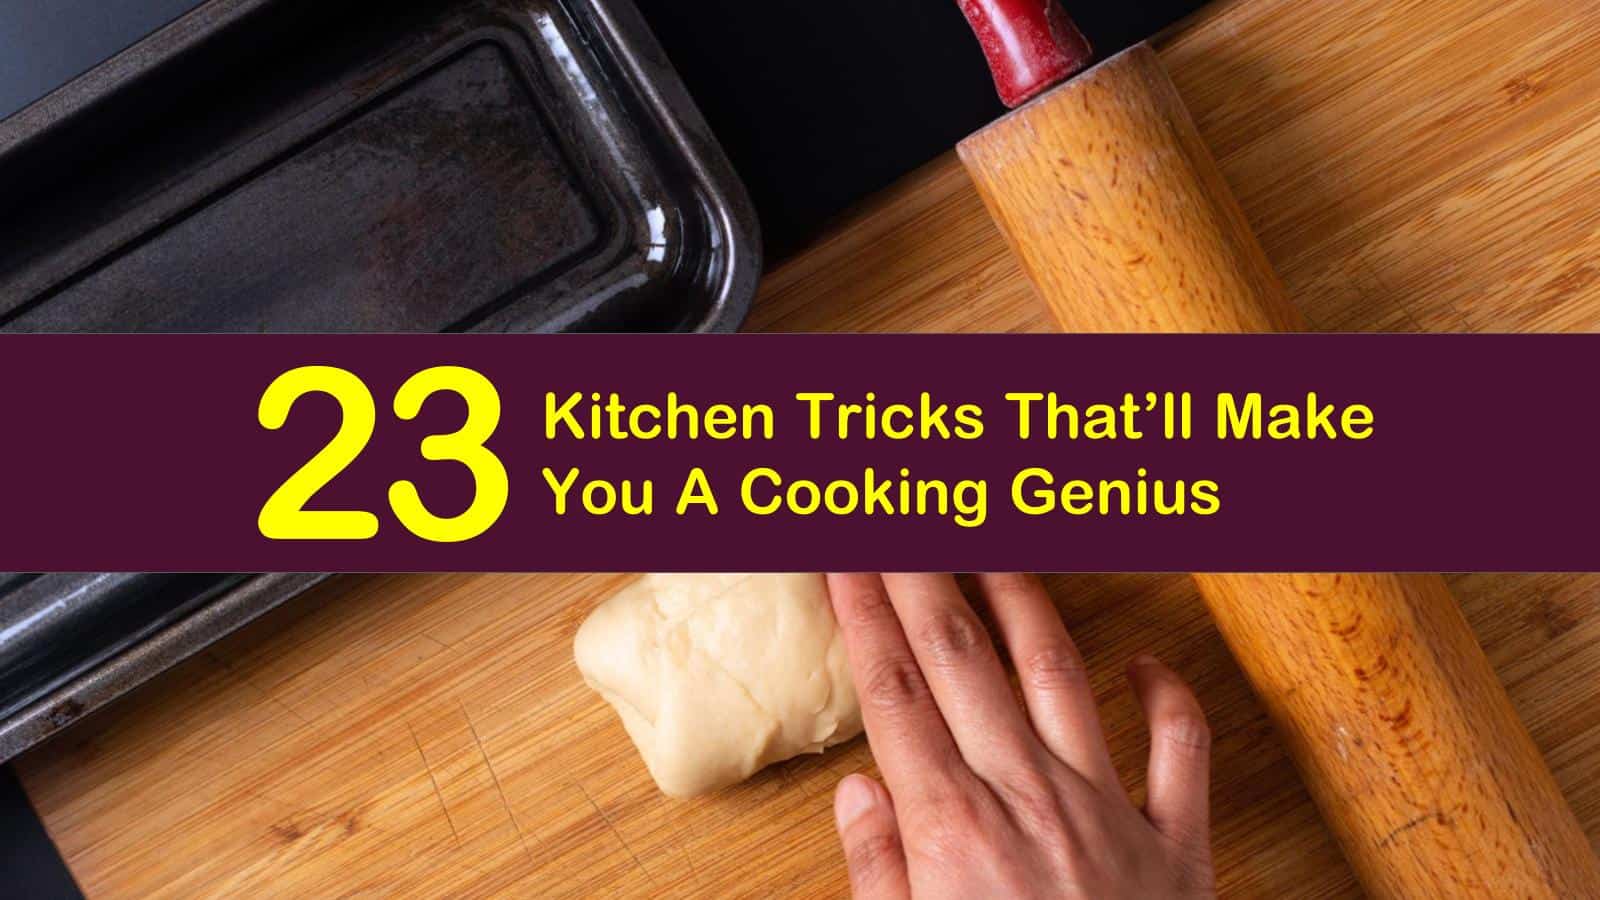 23 Kitchen Tricks That'll Make You A Cooking Genius